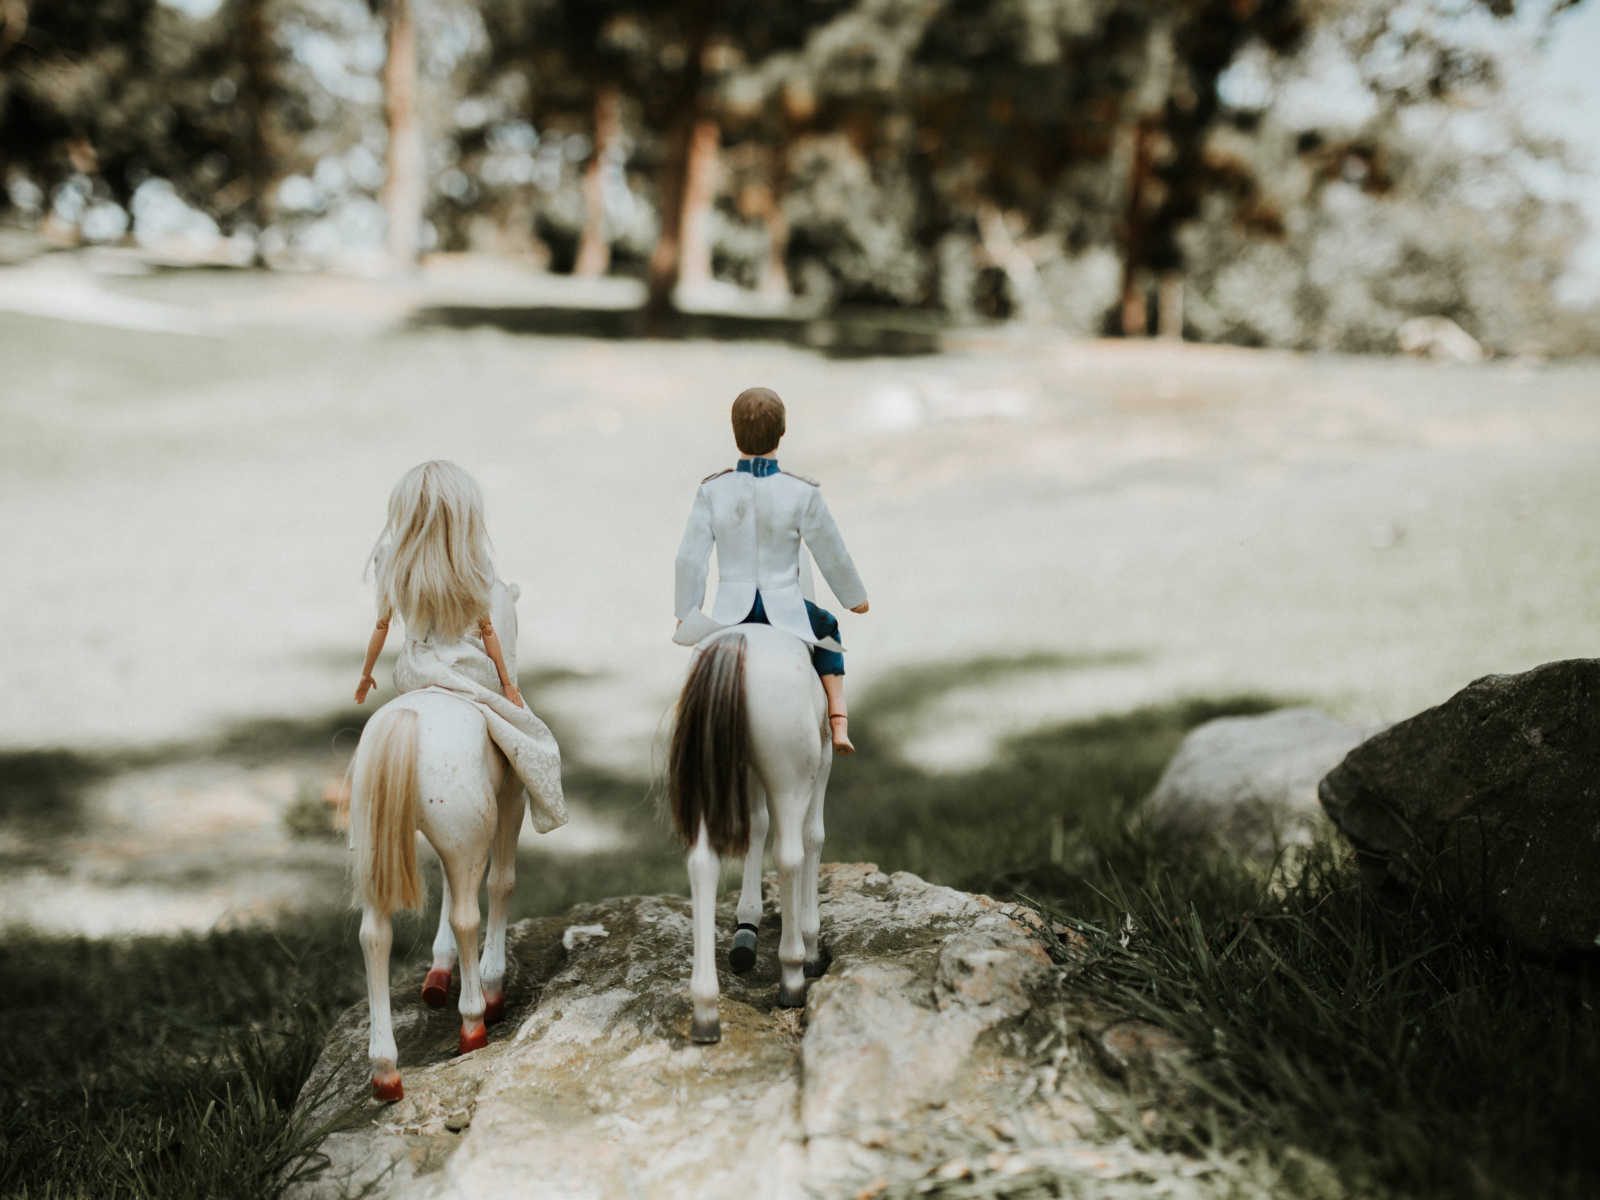 backs of ken and barbie sit on toy horses on a rock 